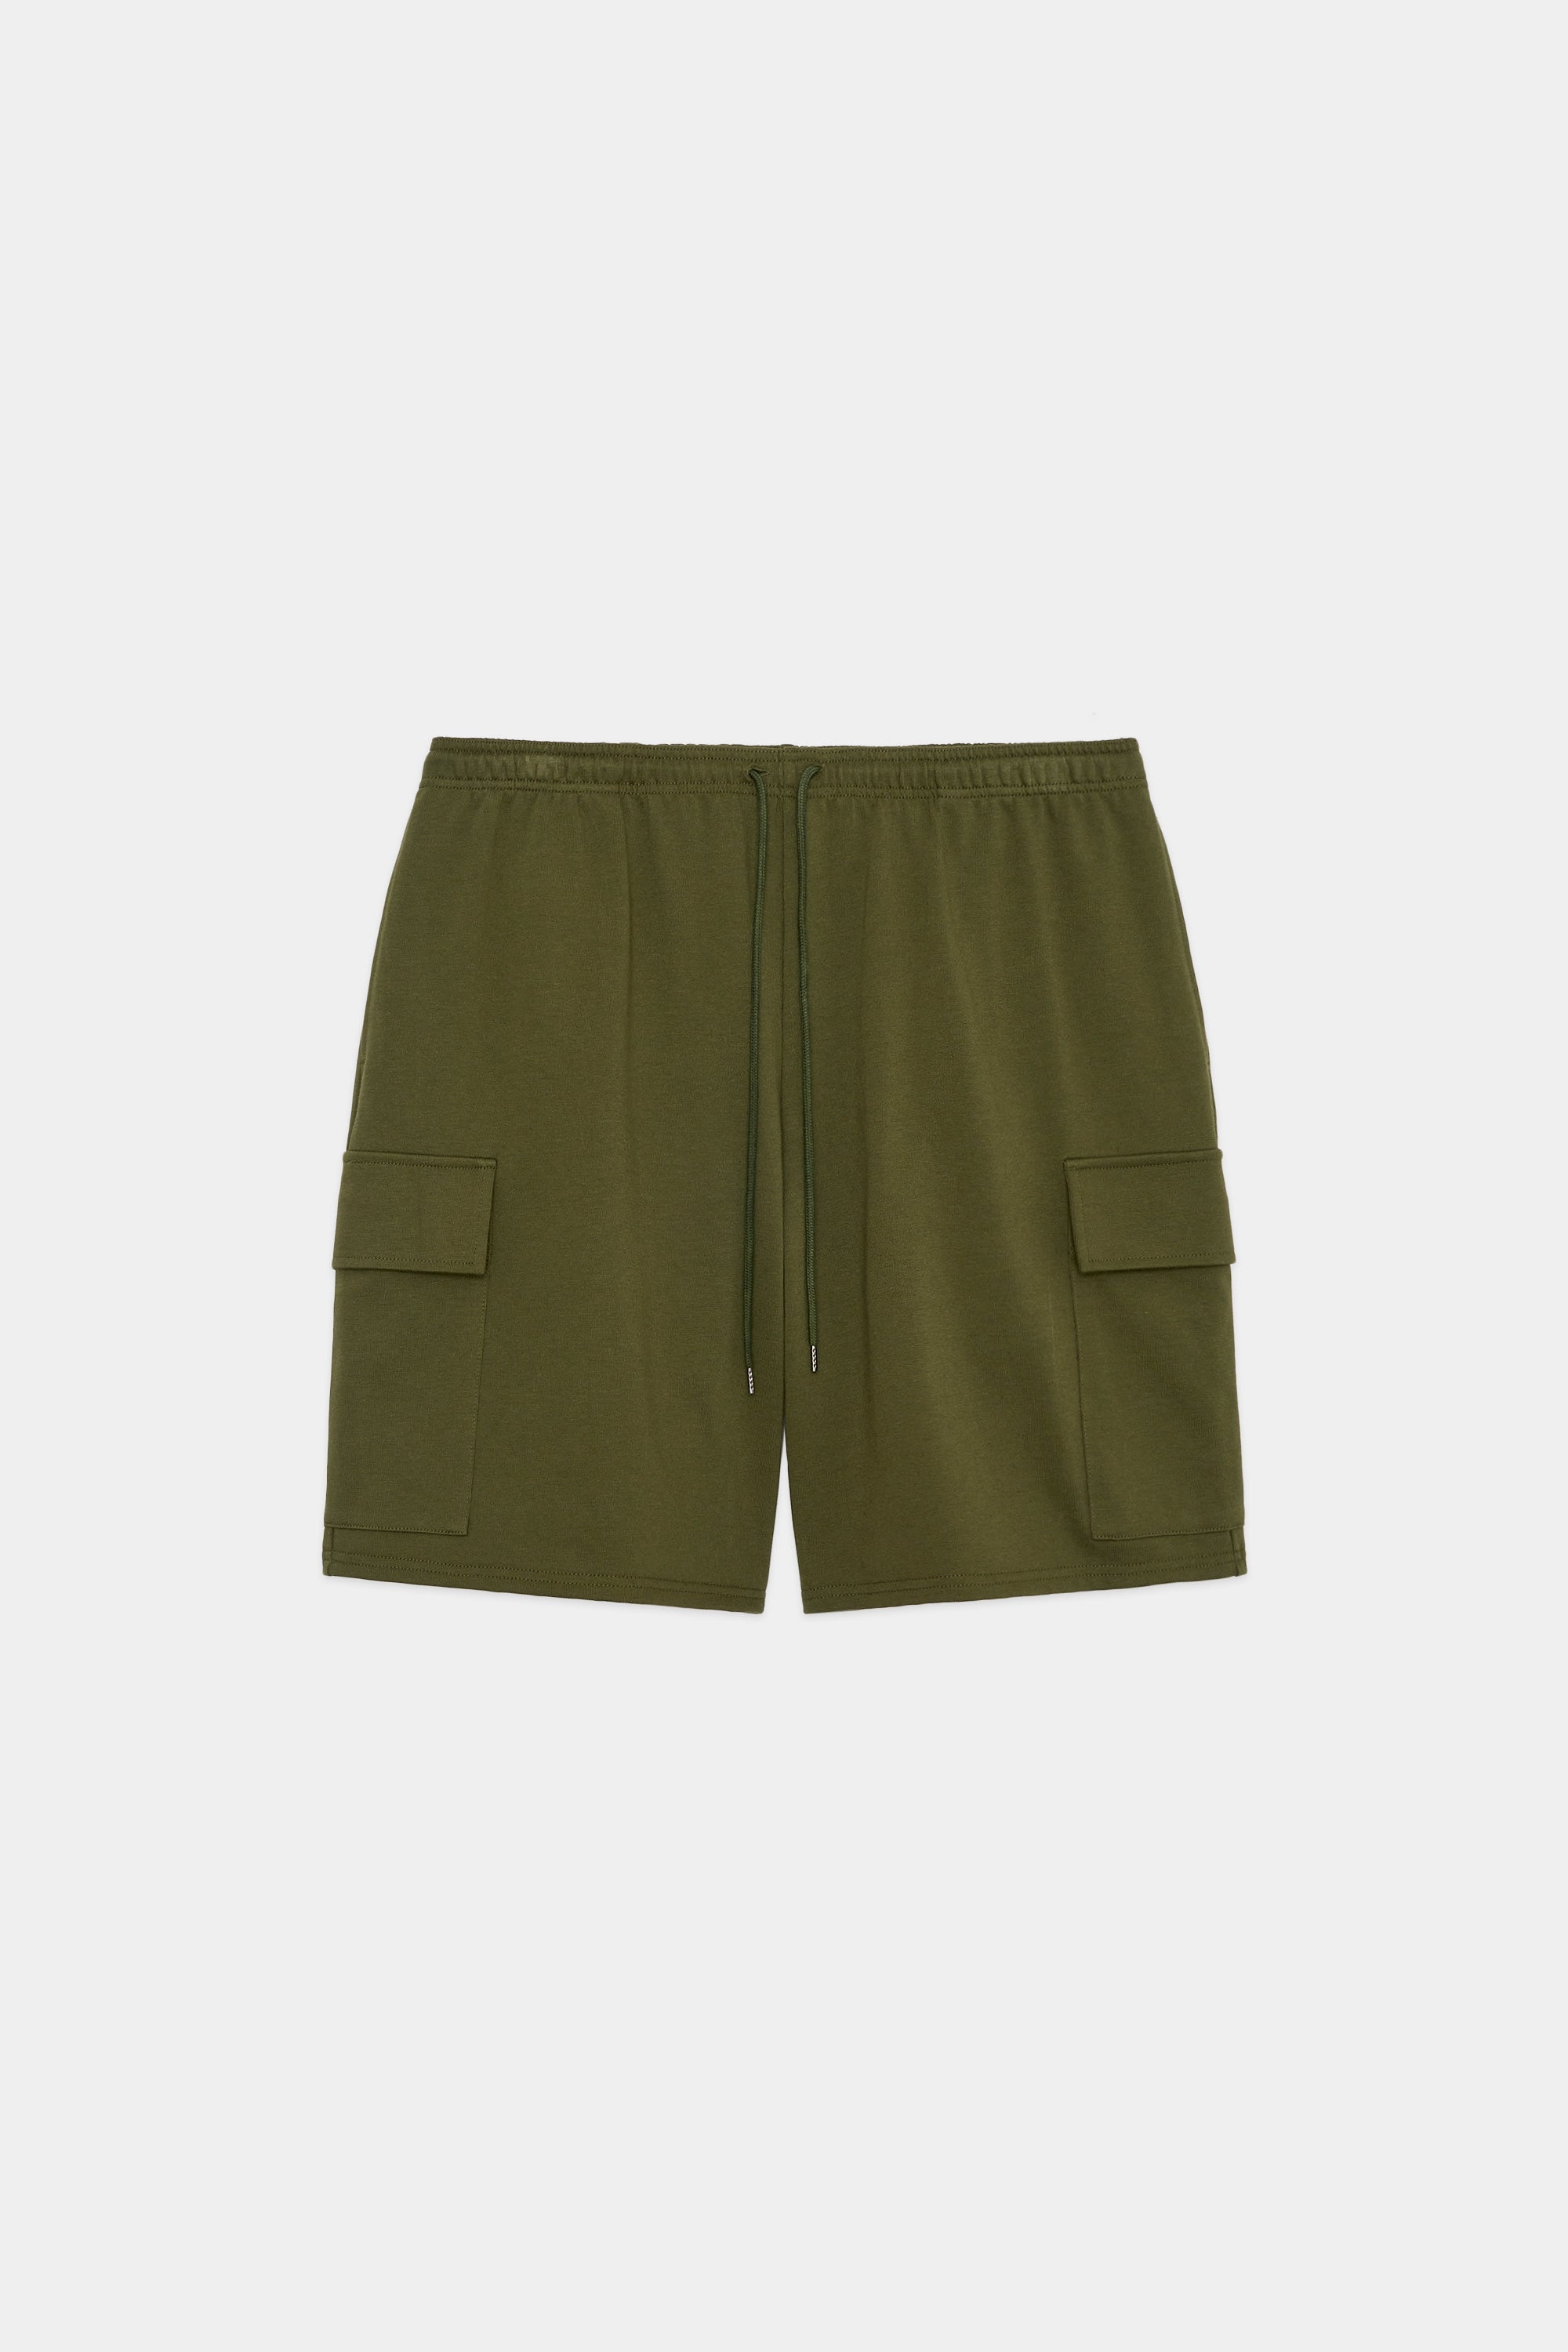 20//1 RECYCLE SUVIN ORGANIC COTTON KNIT CARGO SHORTS, Olive